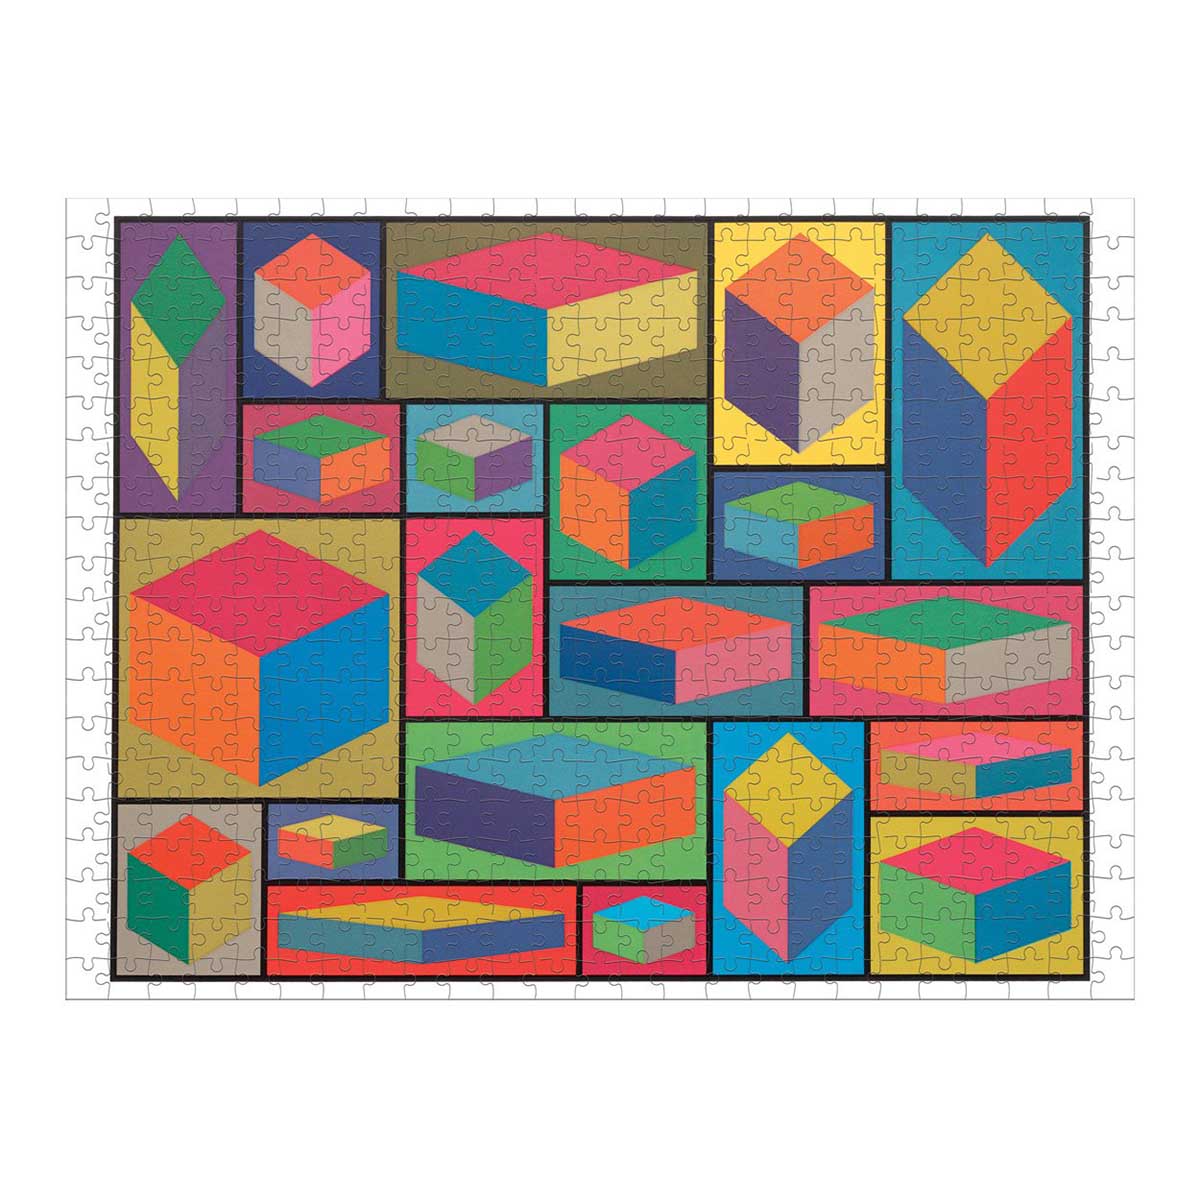 Jigsaw Puzzle: Sol LeWitt Double Sided